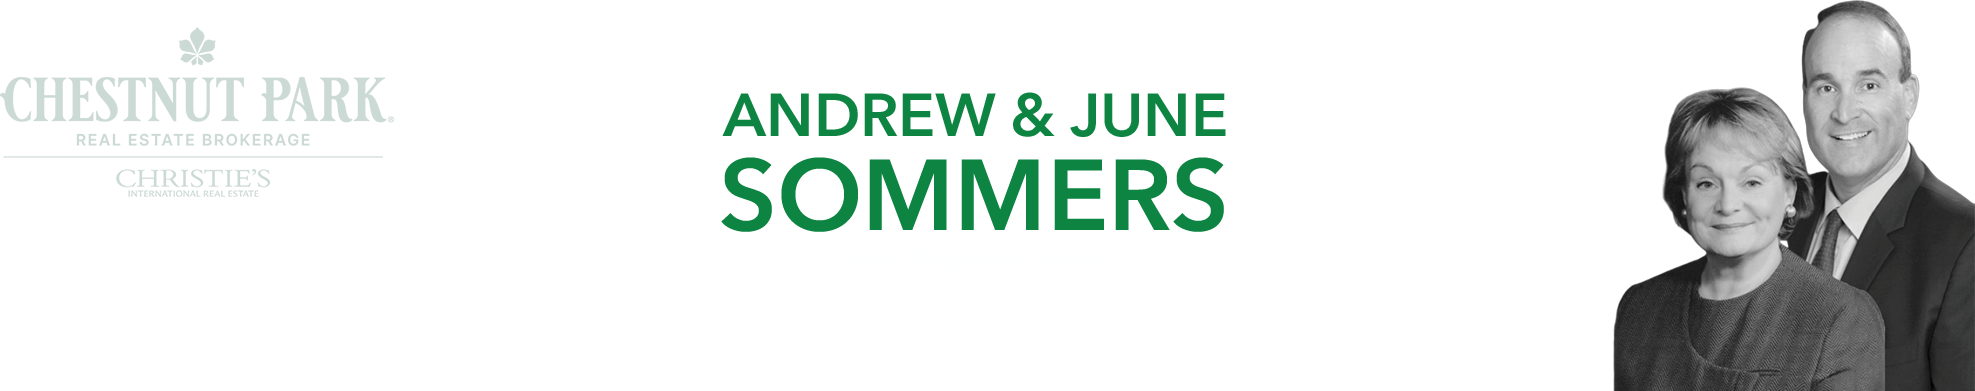 Andrew & June Sommers Graphic Header